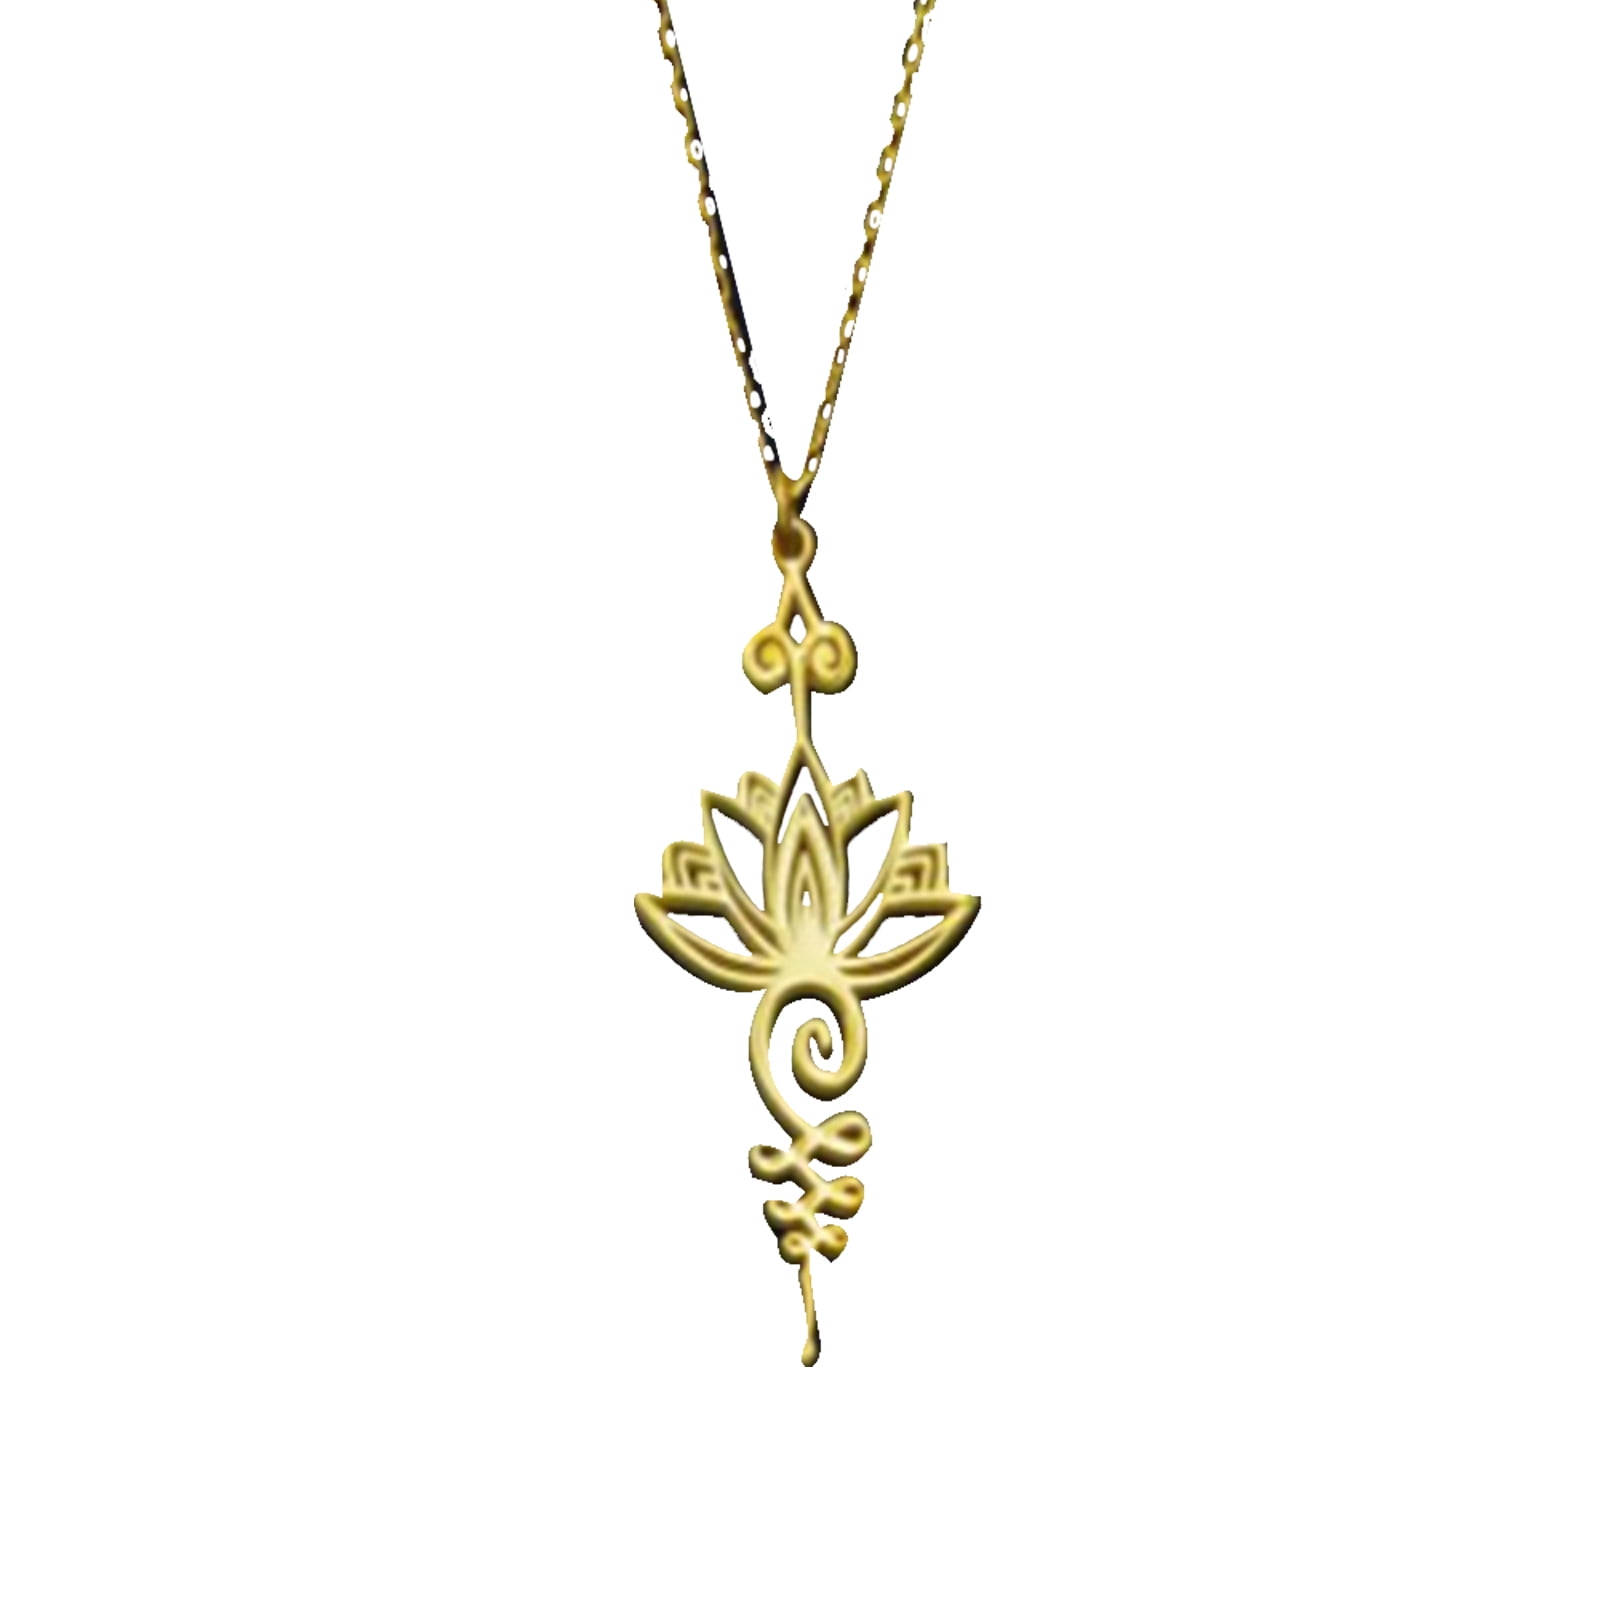 Minimalist Lotus Flower Pendant Necklace Yoga Gift Sterling Silver .925 or Gold 